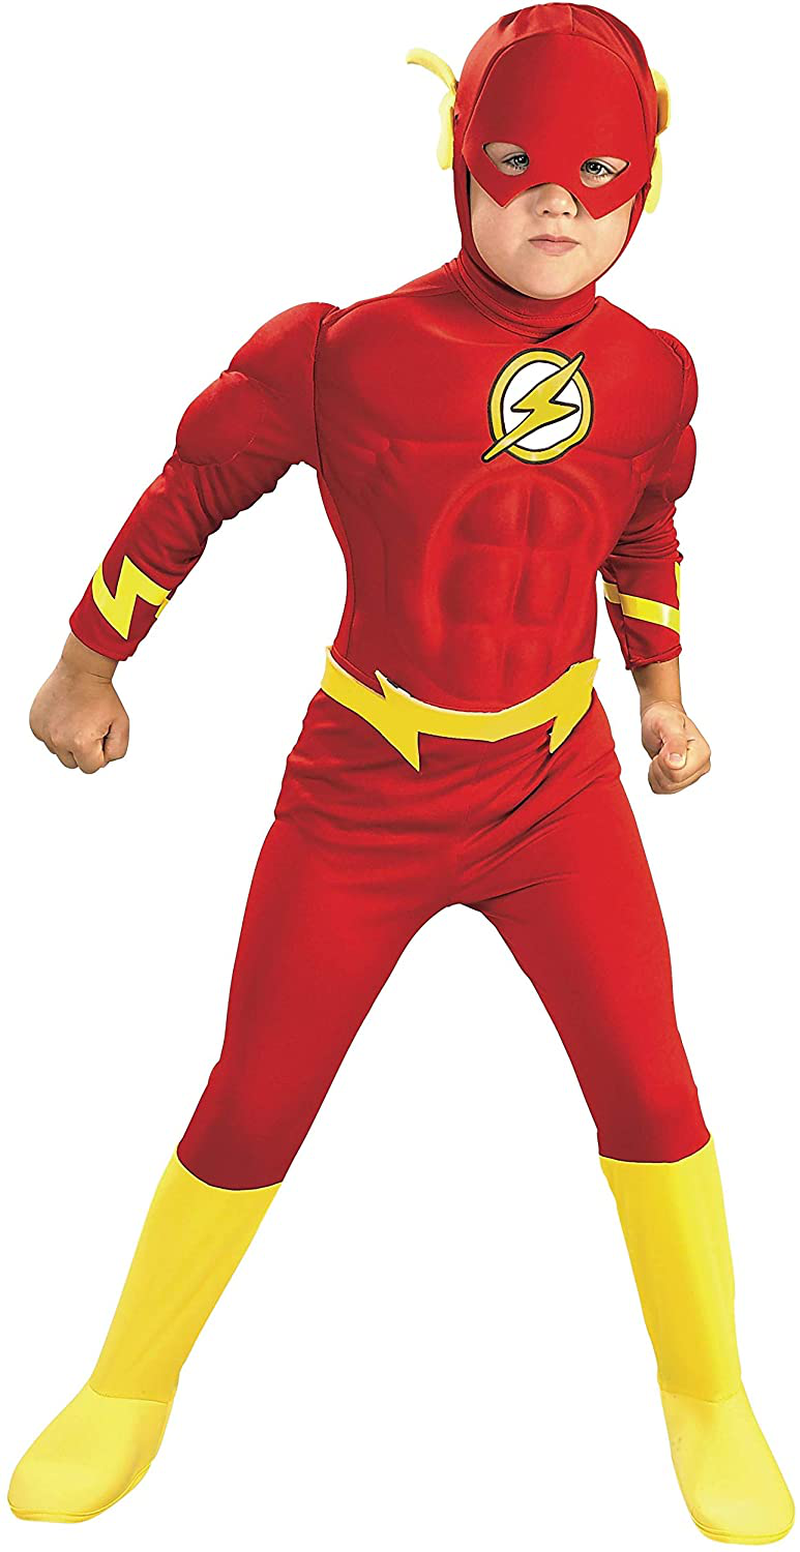 Rubie's DC Comics Deluxe Muscle Chest The Flash Child's Costume, Medium